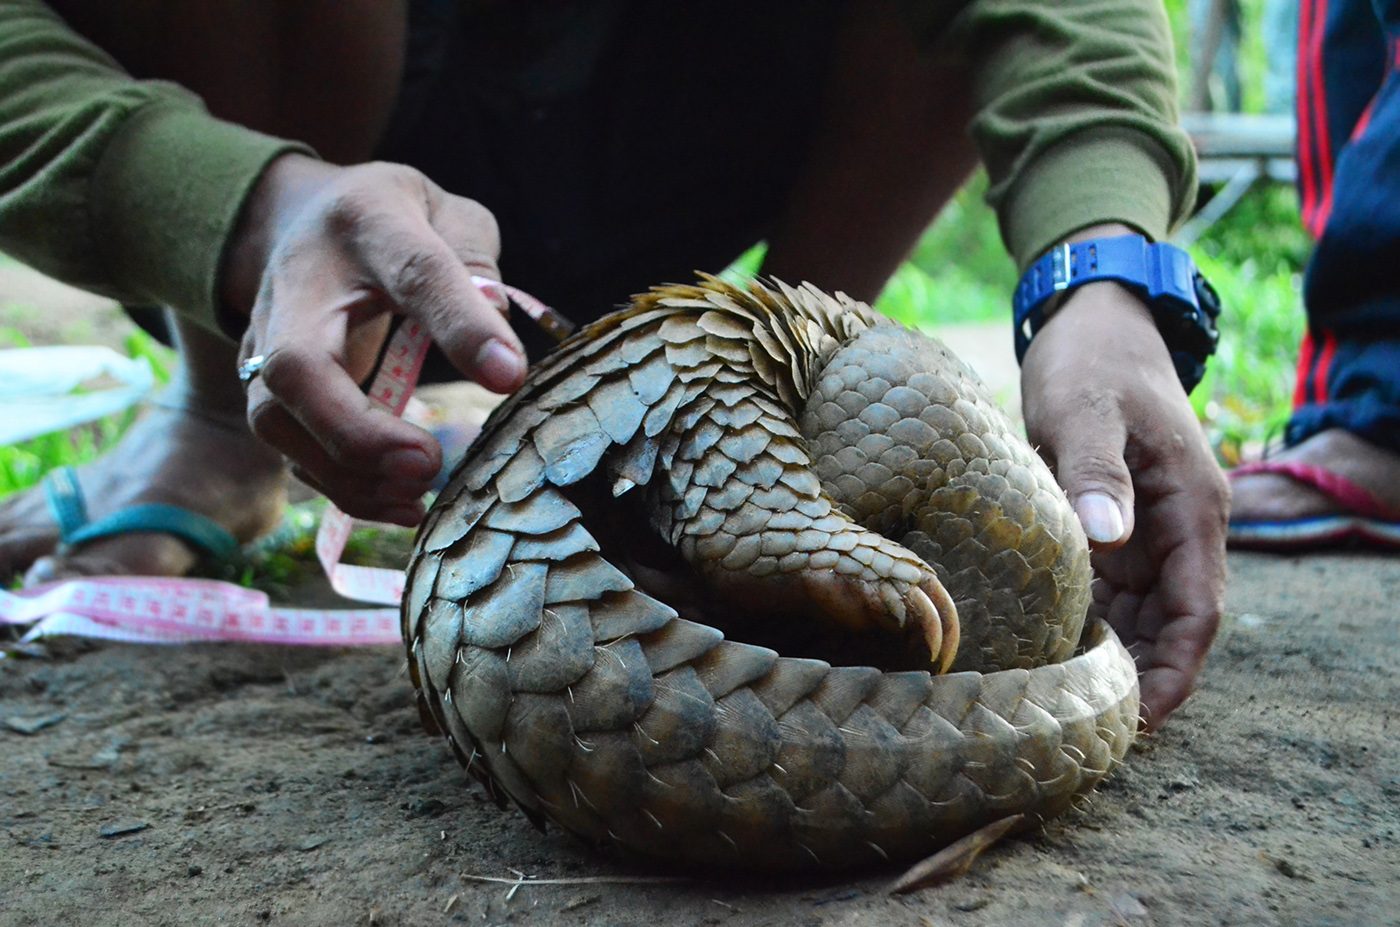 PANGOLIN BALL. Pangolins roll up in a ball when they feel threatened. Photo by Gregg Yan 